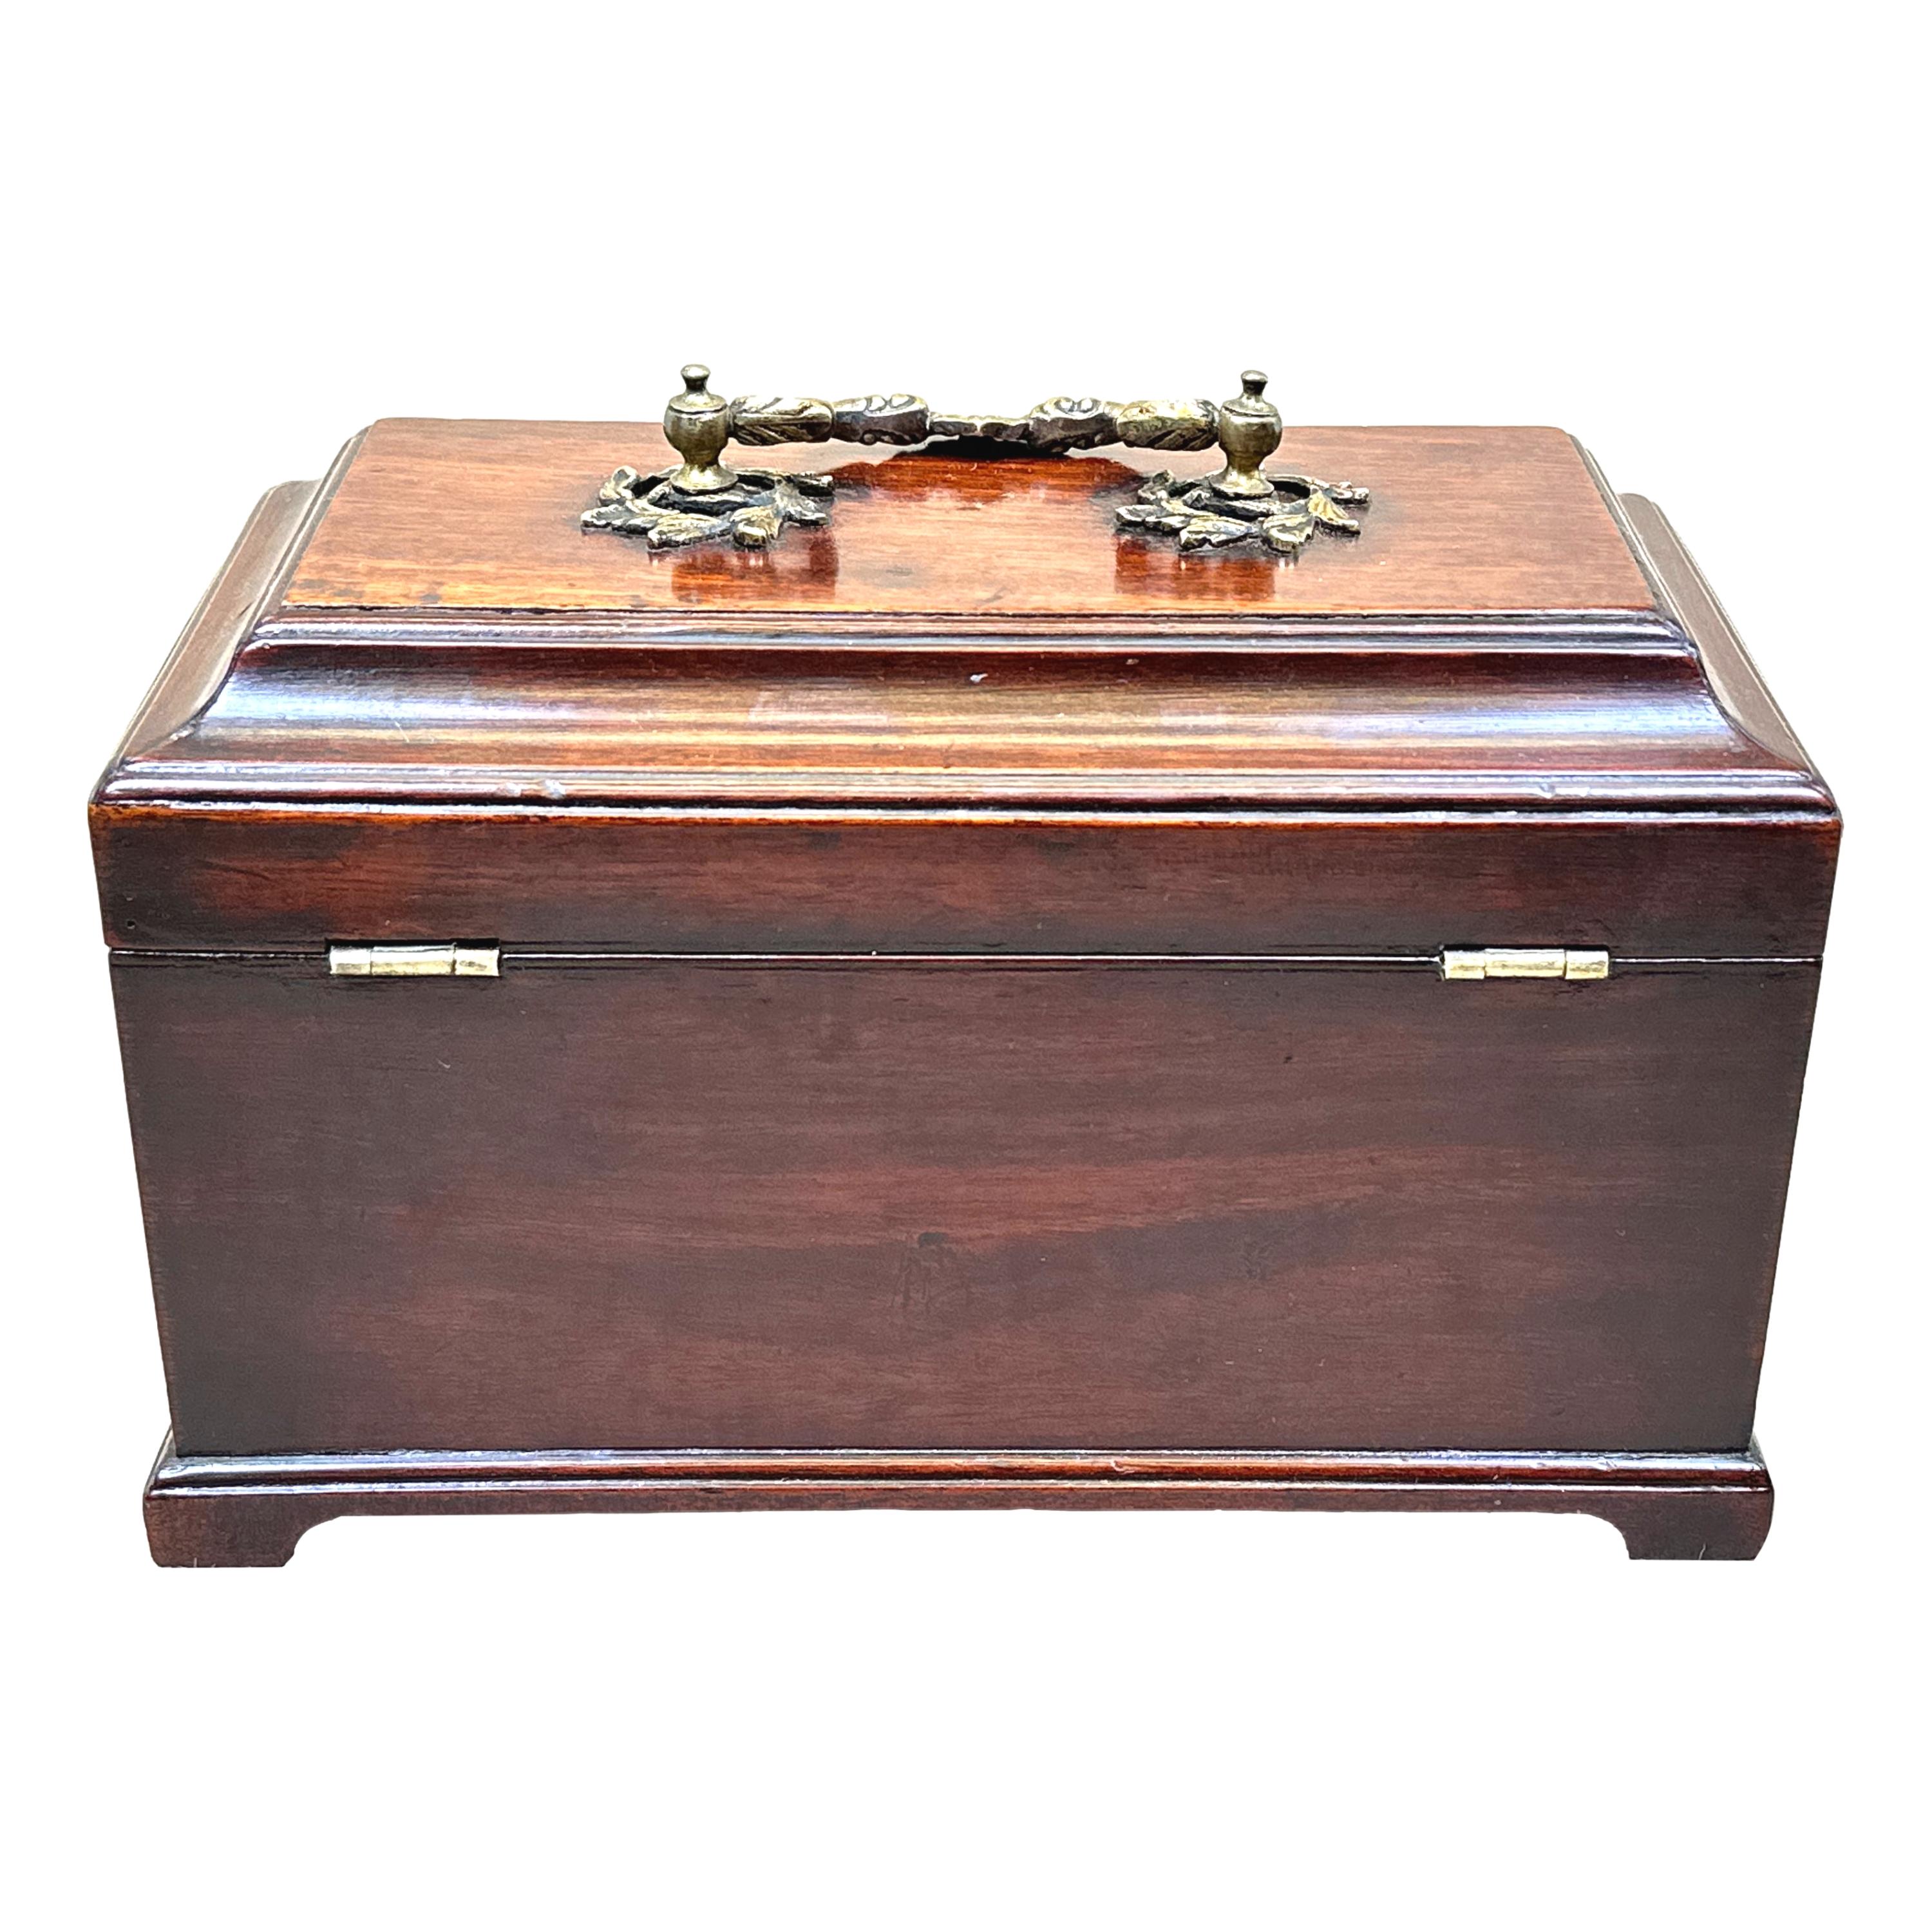 Georgian 18th Century Mahogany Tea Caddy In Good Condition For Sale In Bedfordshire, GB